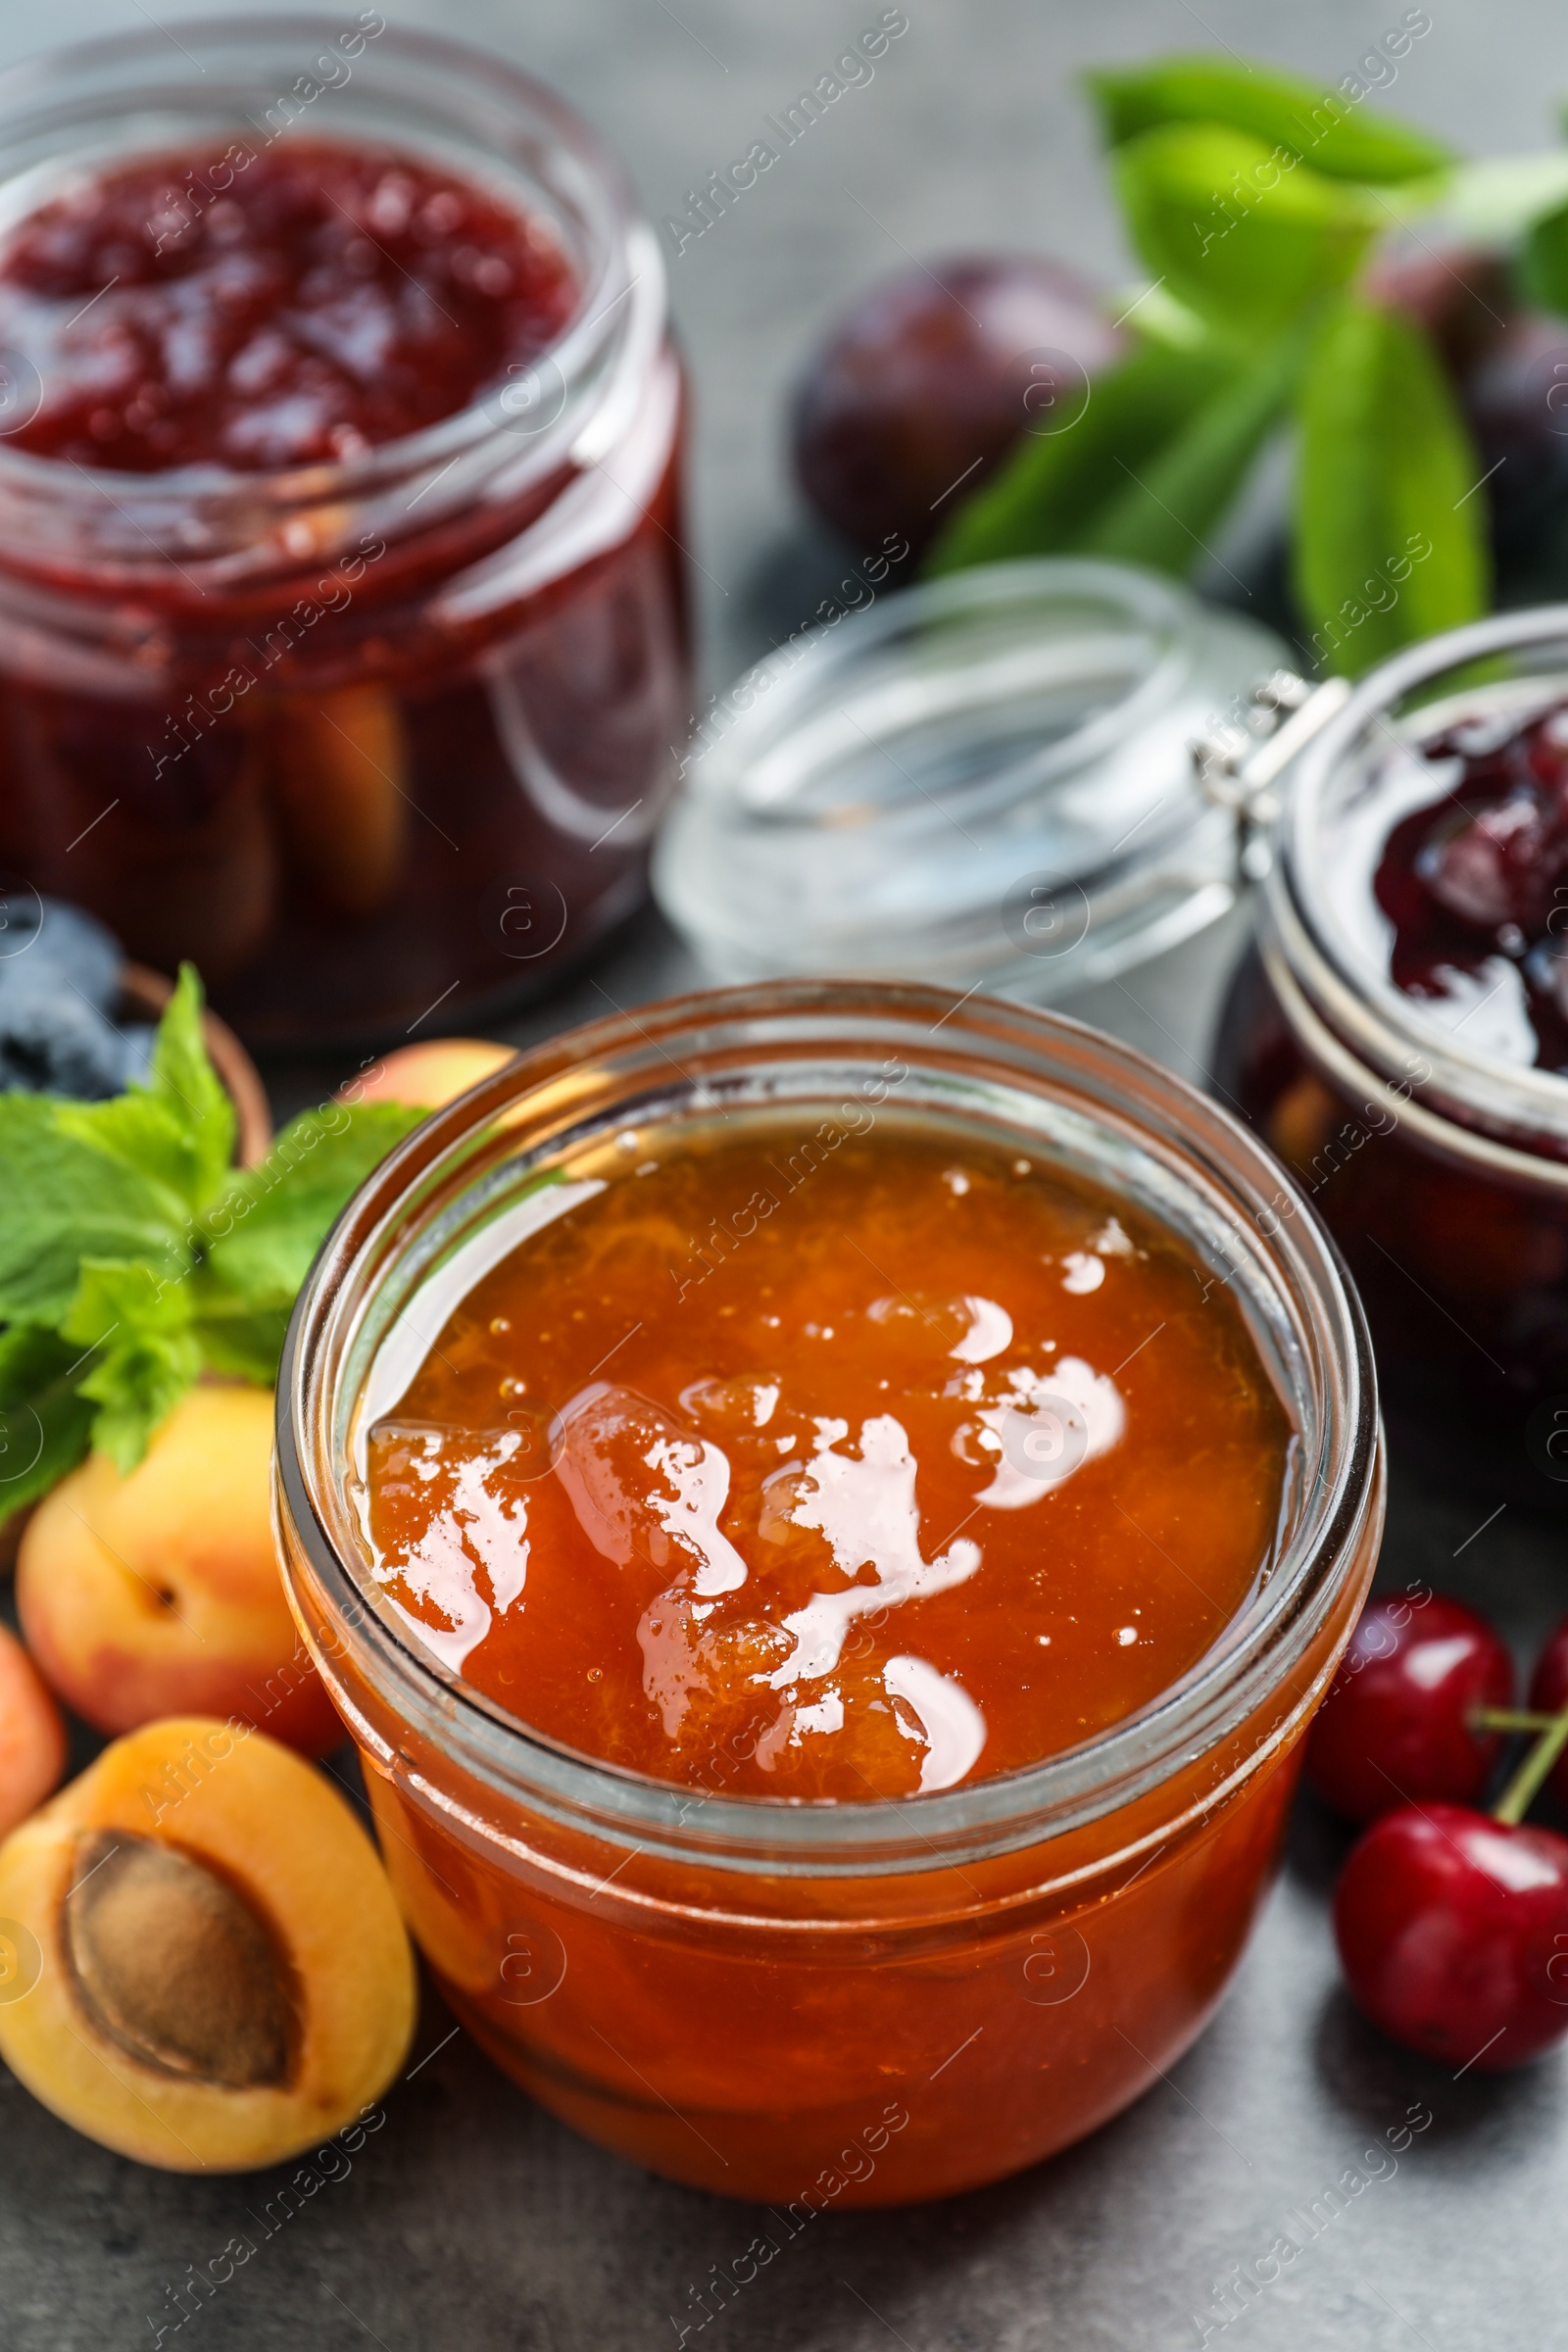 Photo of Jars with different jams and fresh fruits on grey table, closeup